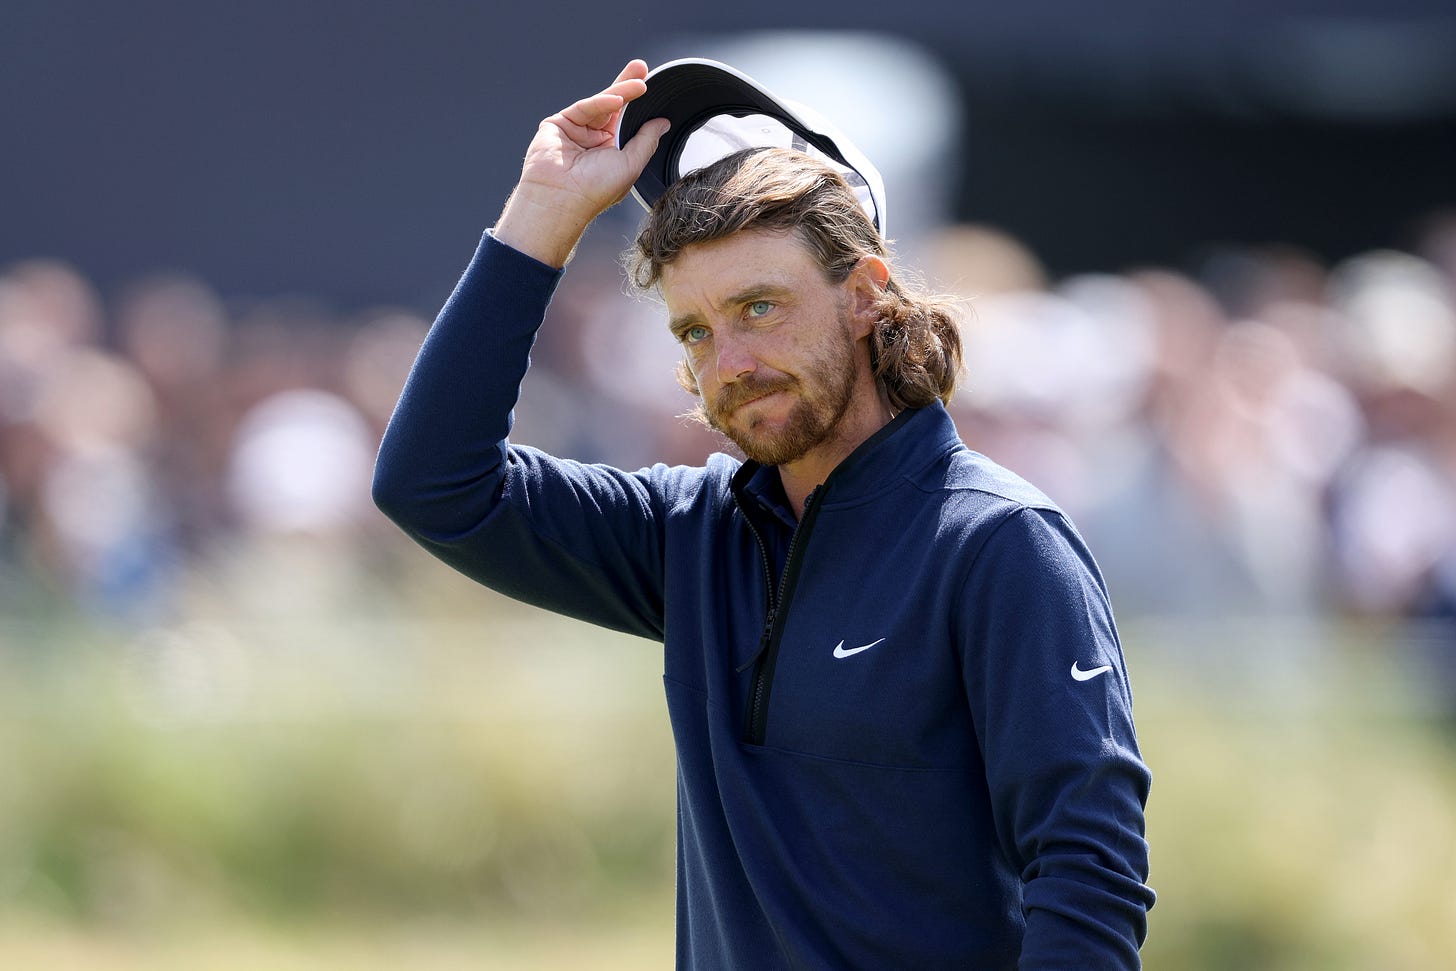 British Open 2023: Tommy Fleetwood opens with 66 after getting an earful  from his caddie about being 'hometown' favorite | Golf News and Tour  Information | GolfDigest.com